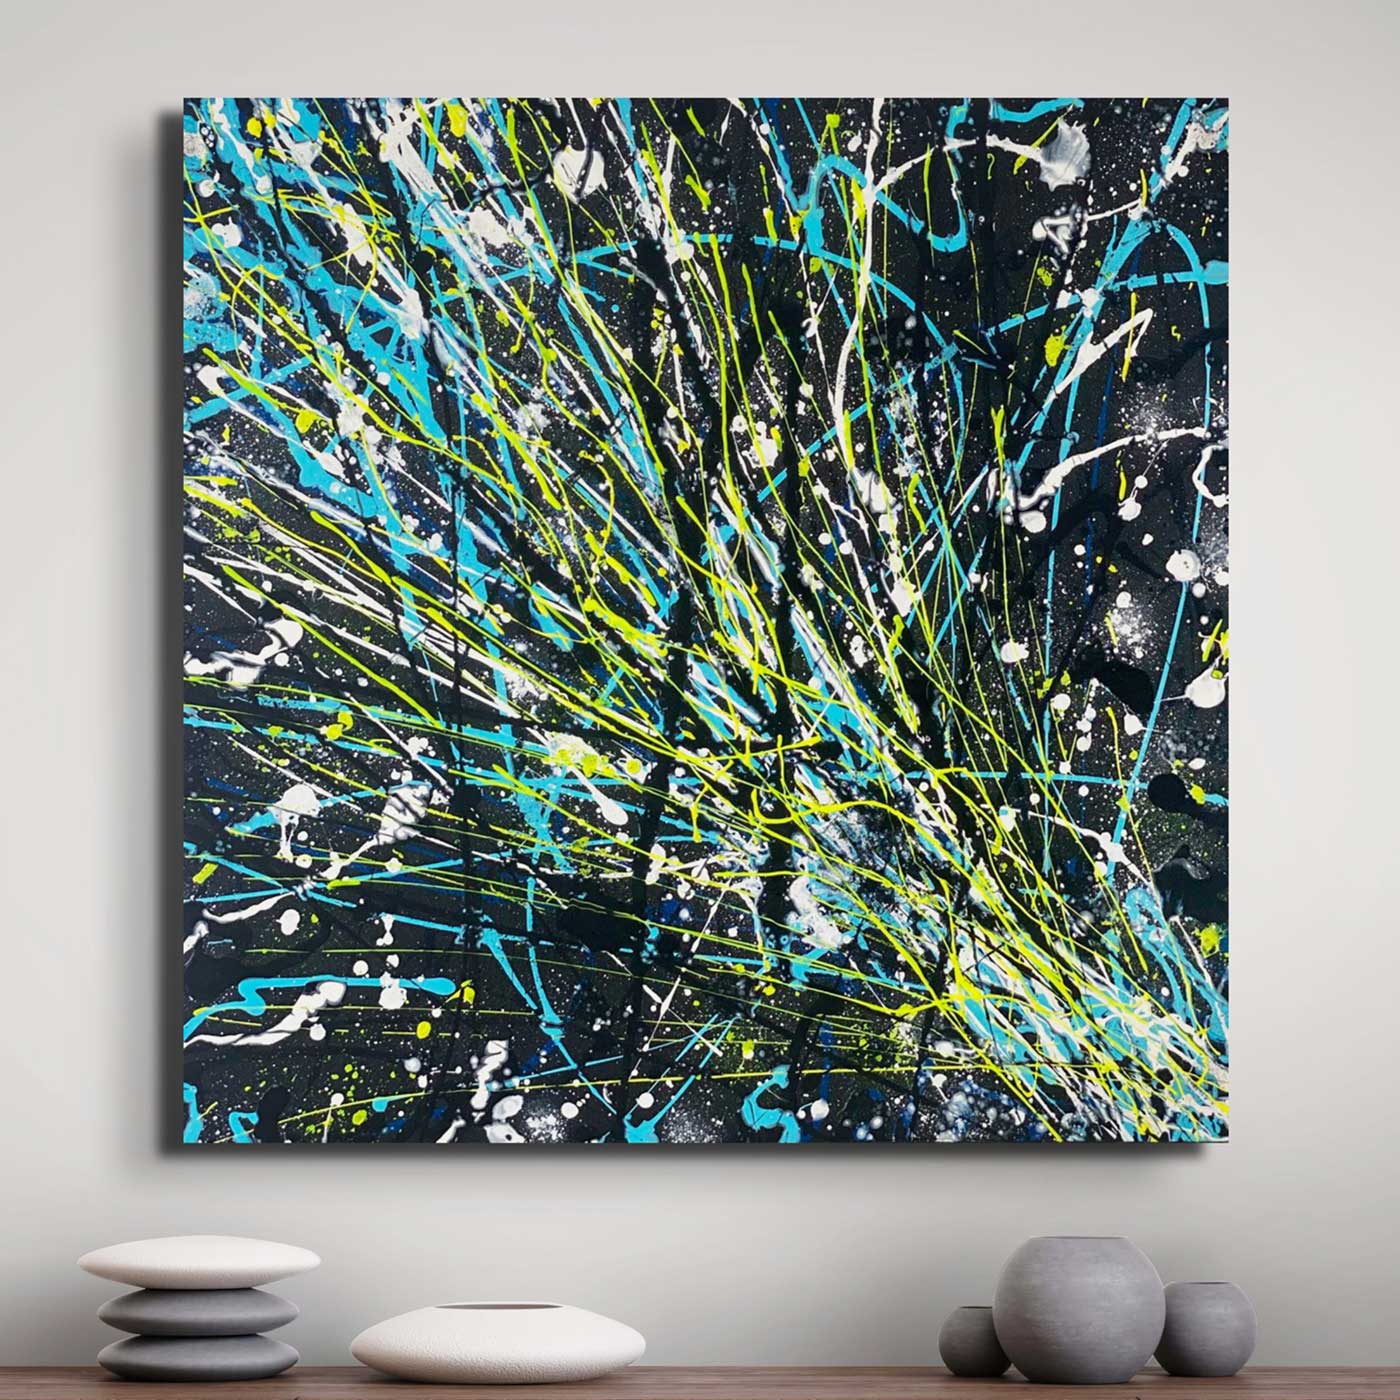 'Comet' Original Abstract Painting on Canvas by Bridget Bradley, seen Unframed Hanging Above Stone Ornaments. 